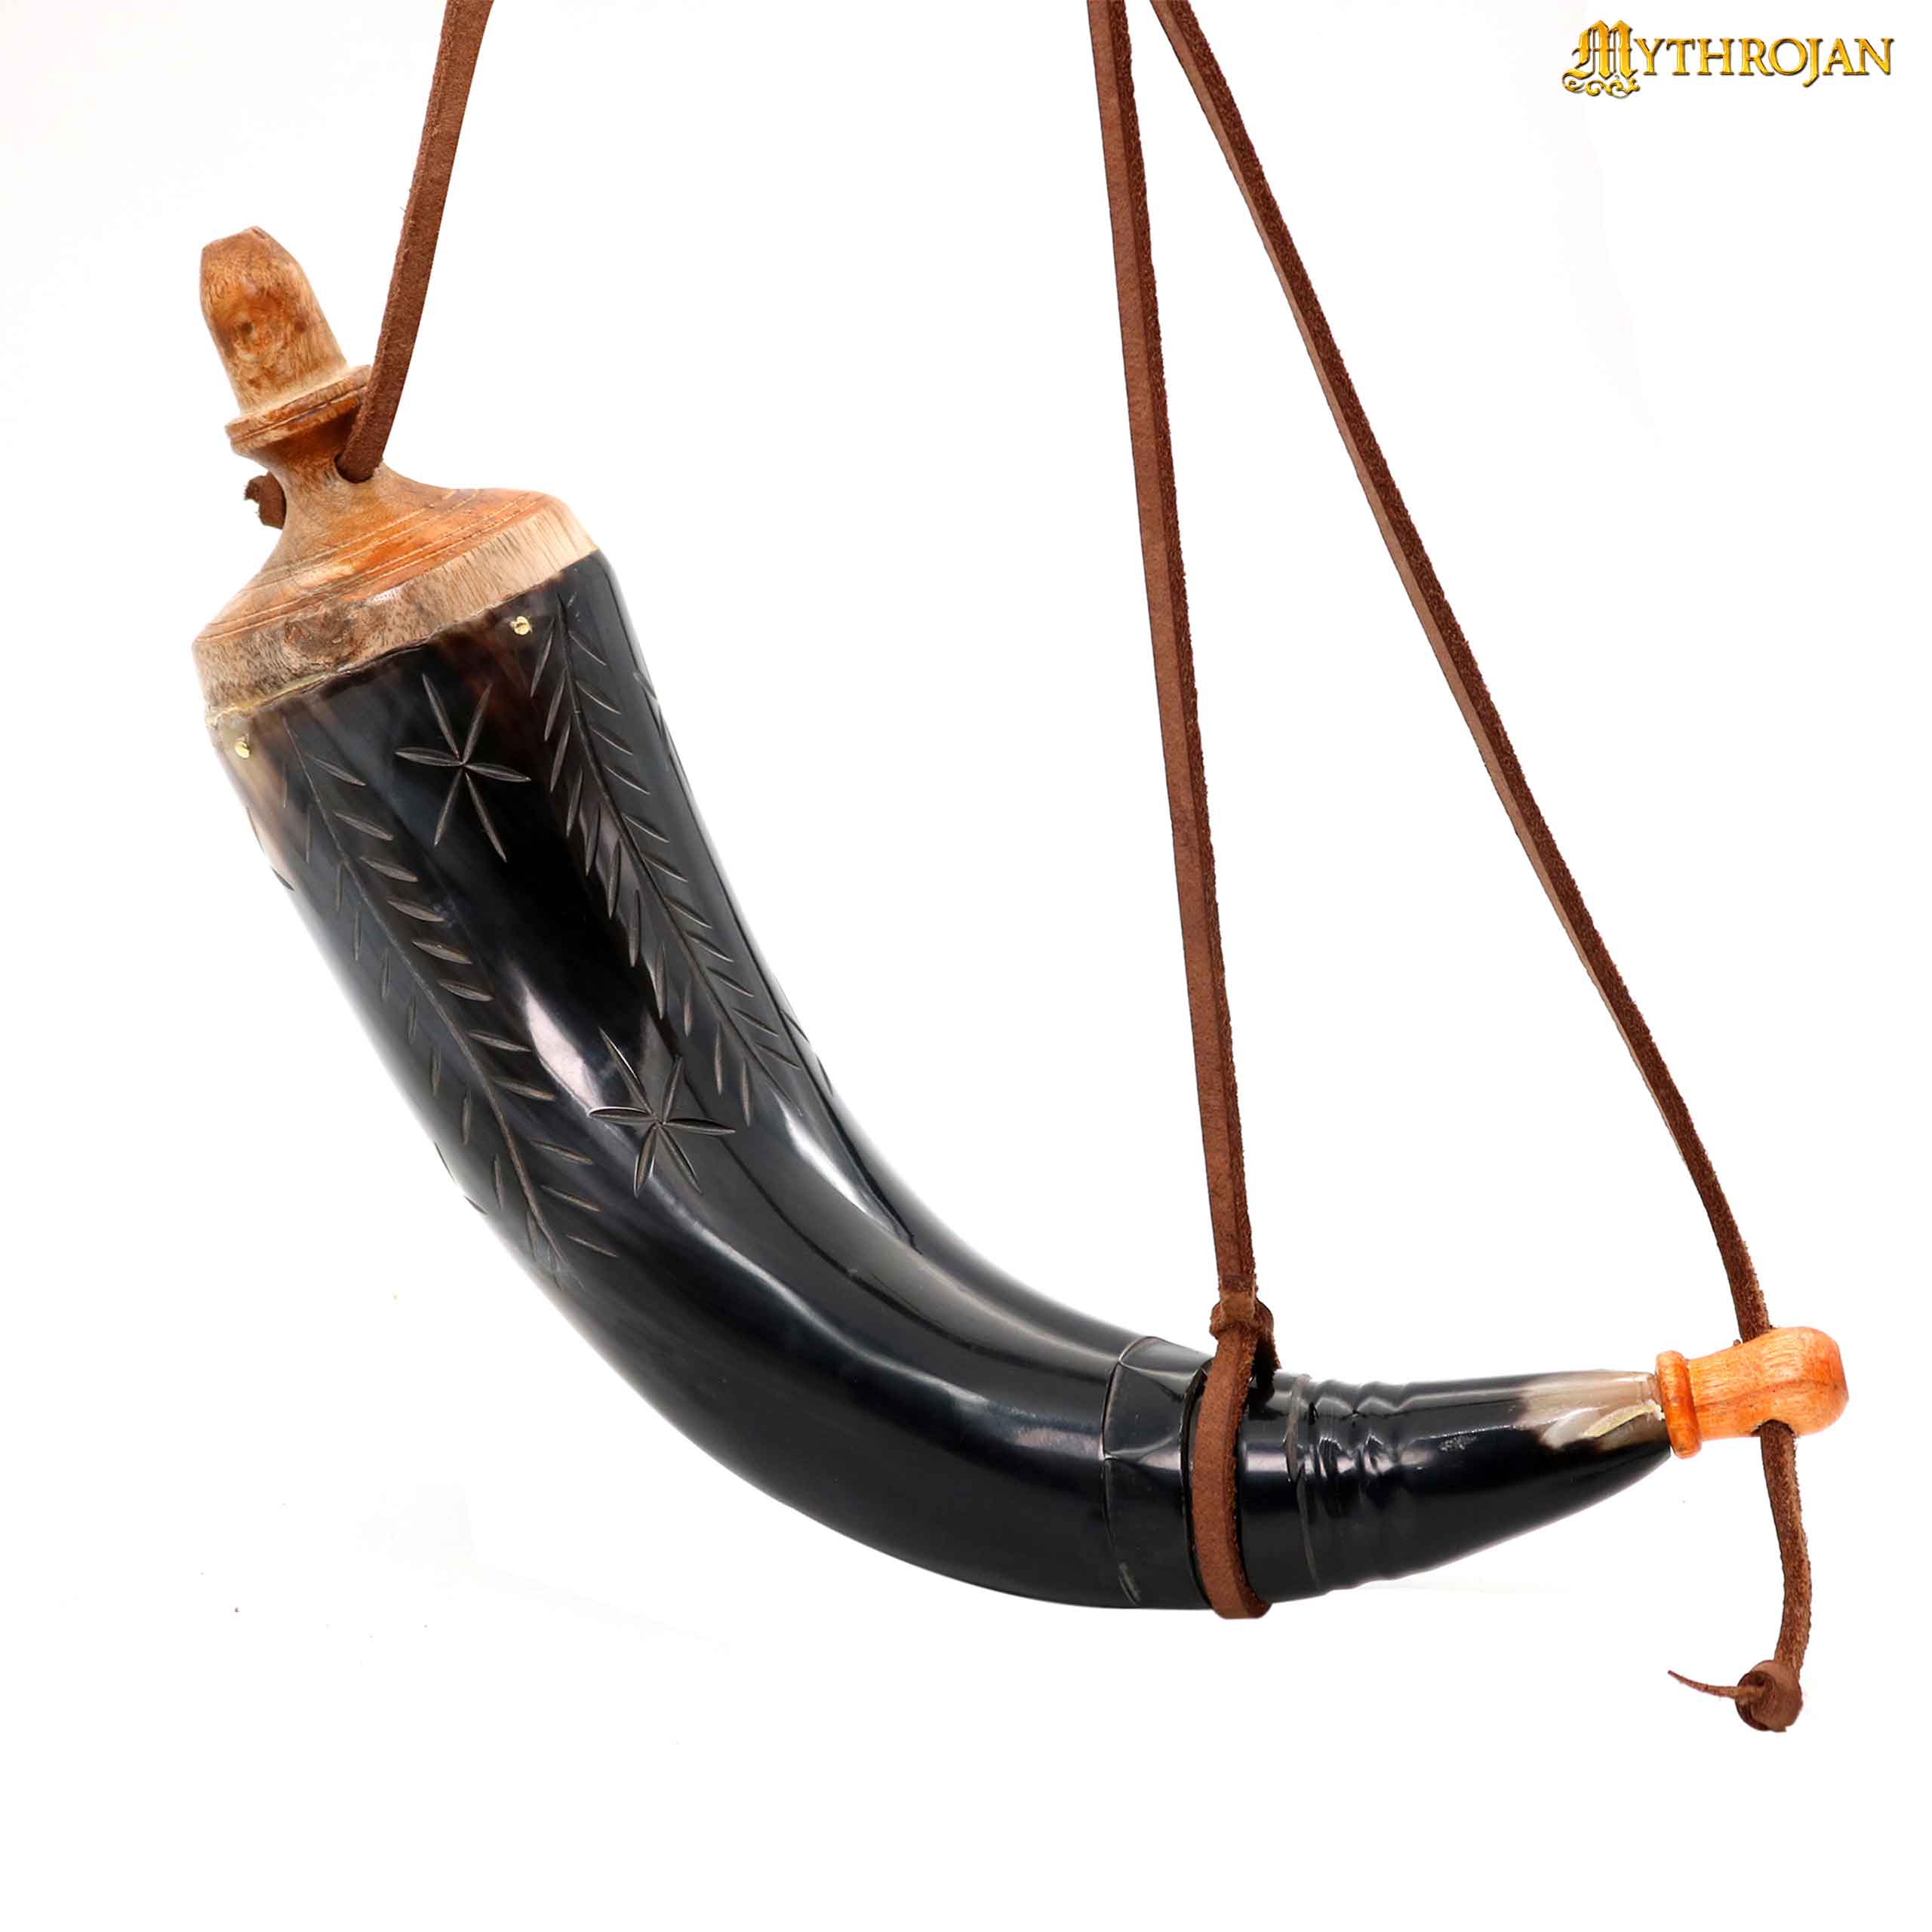 Mythrojan Hand Carved Powder Horn with Leather Strap for Civil War Re